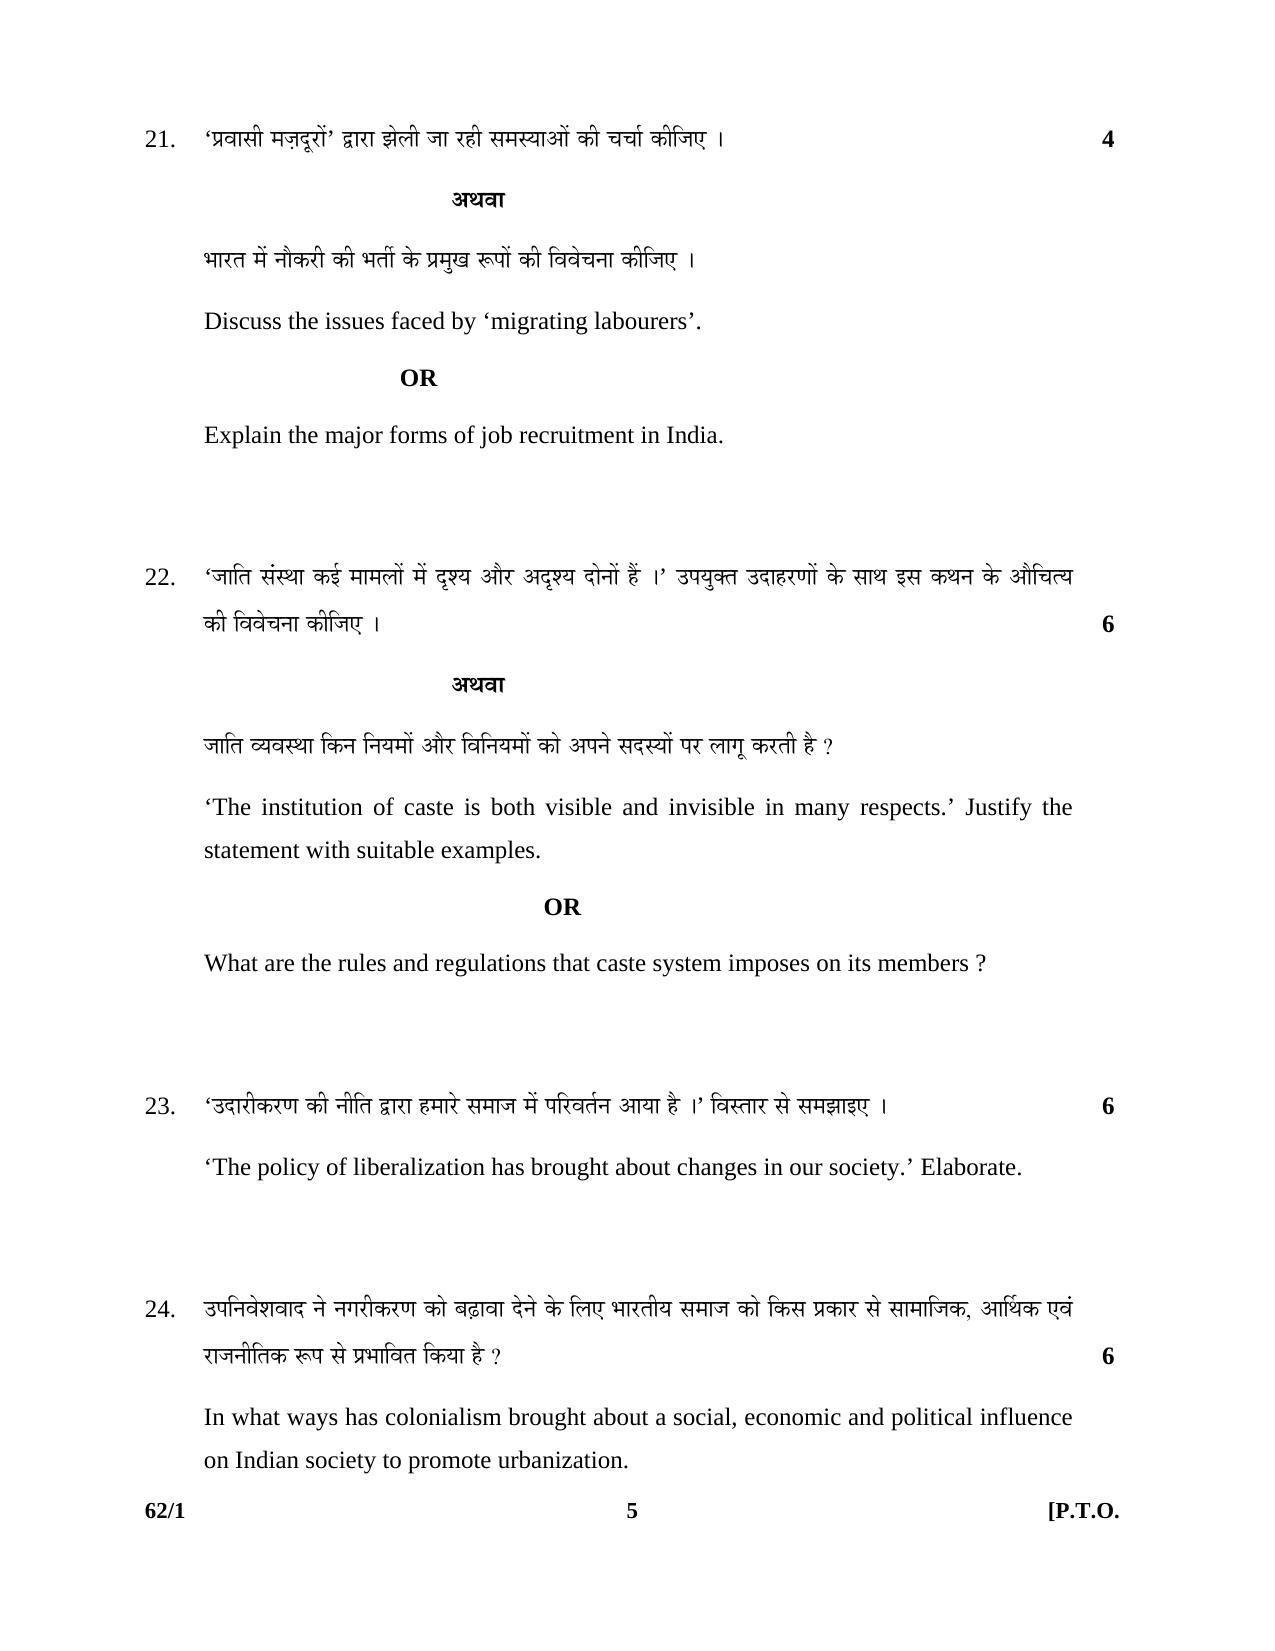 CBSE Class 12 62-1 SOCIOLOGY 2016 Question Paper - Page 5